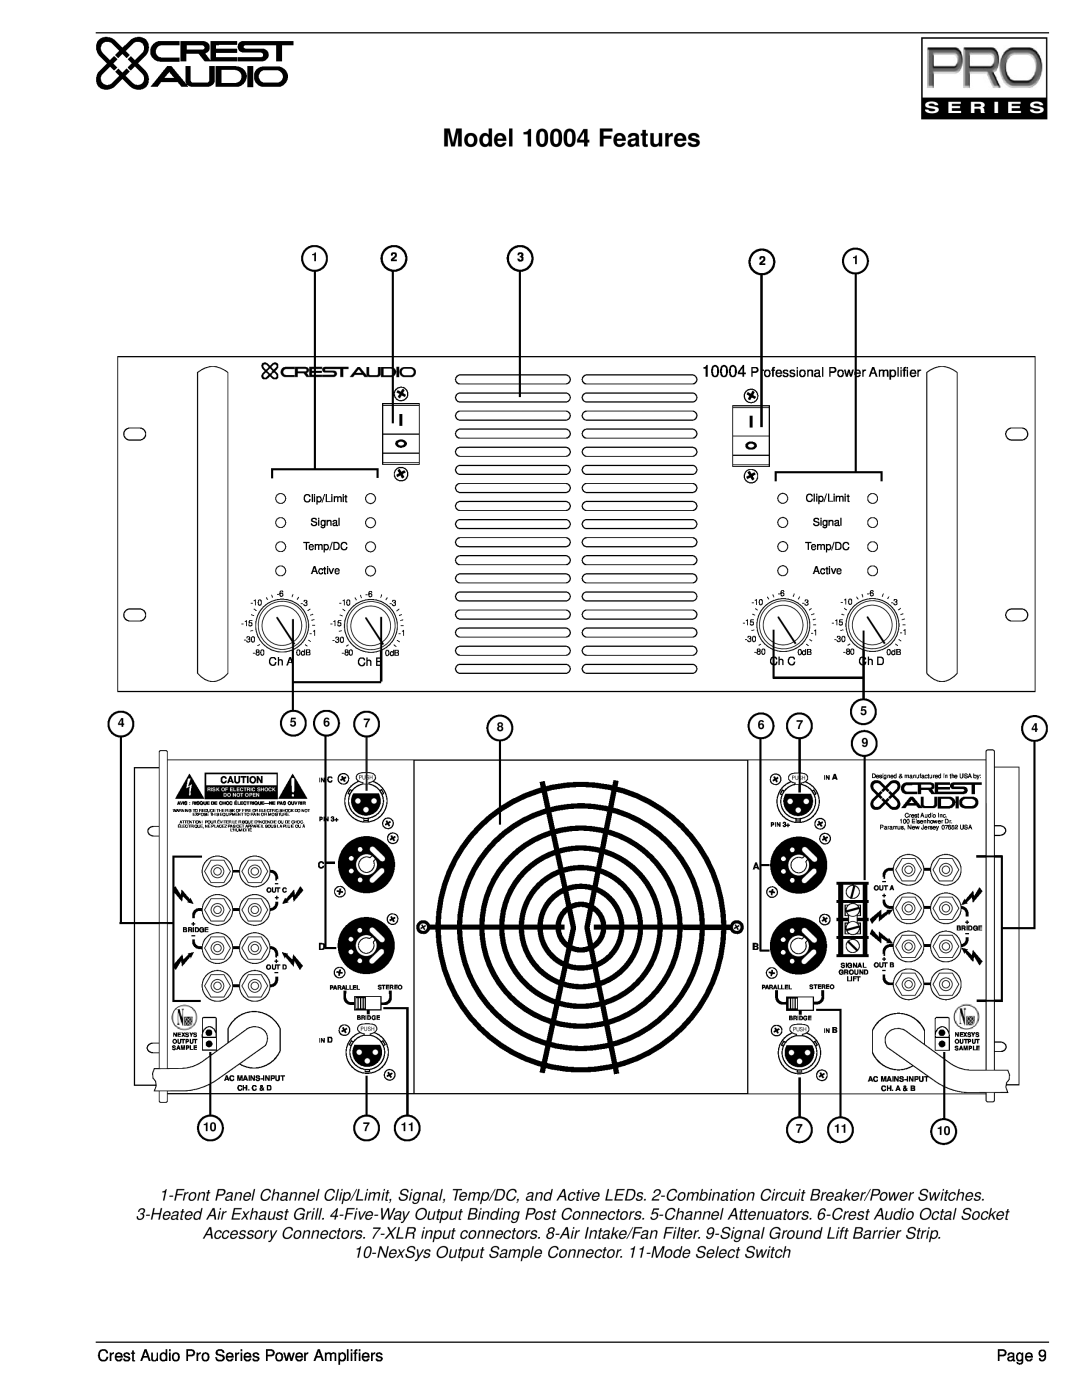 Crest Audio Stereo Amplifier owner manual Model 10004 Features, Professional Power Amplifier 